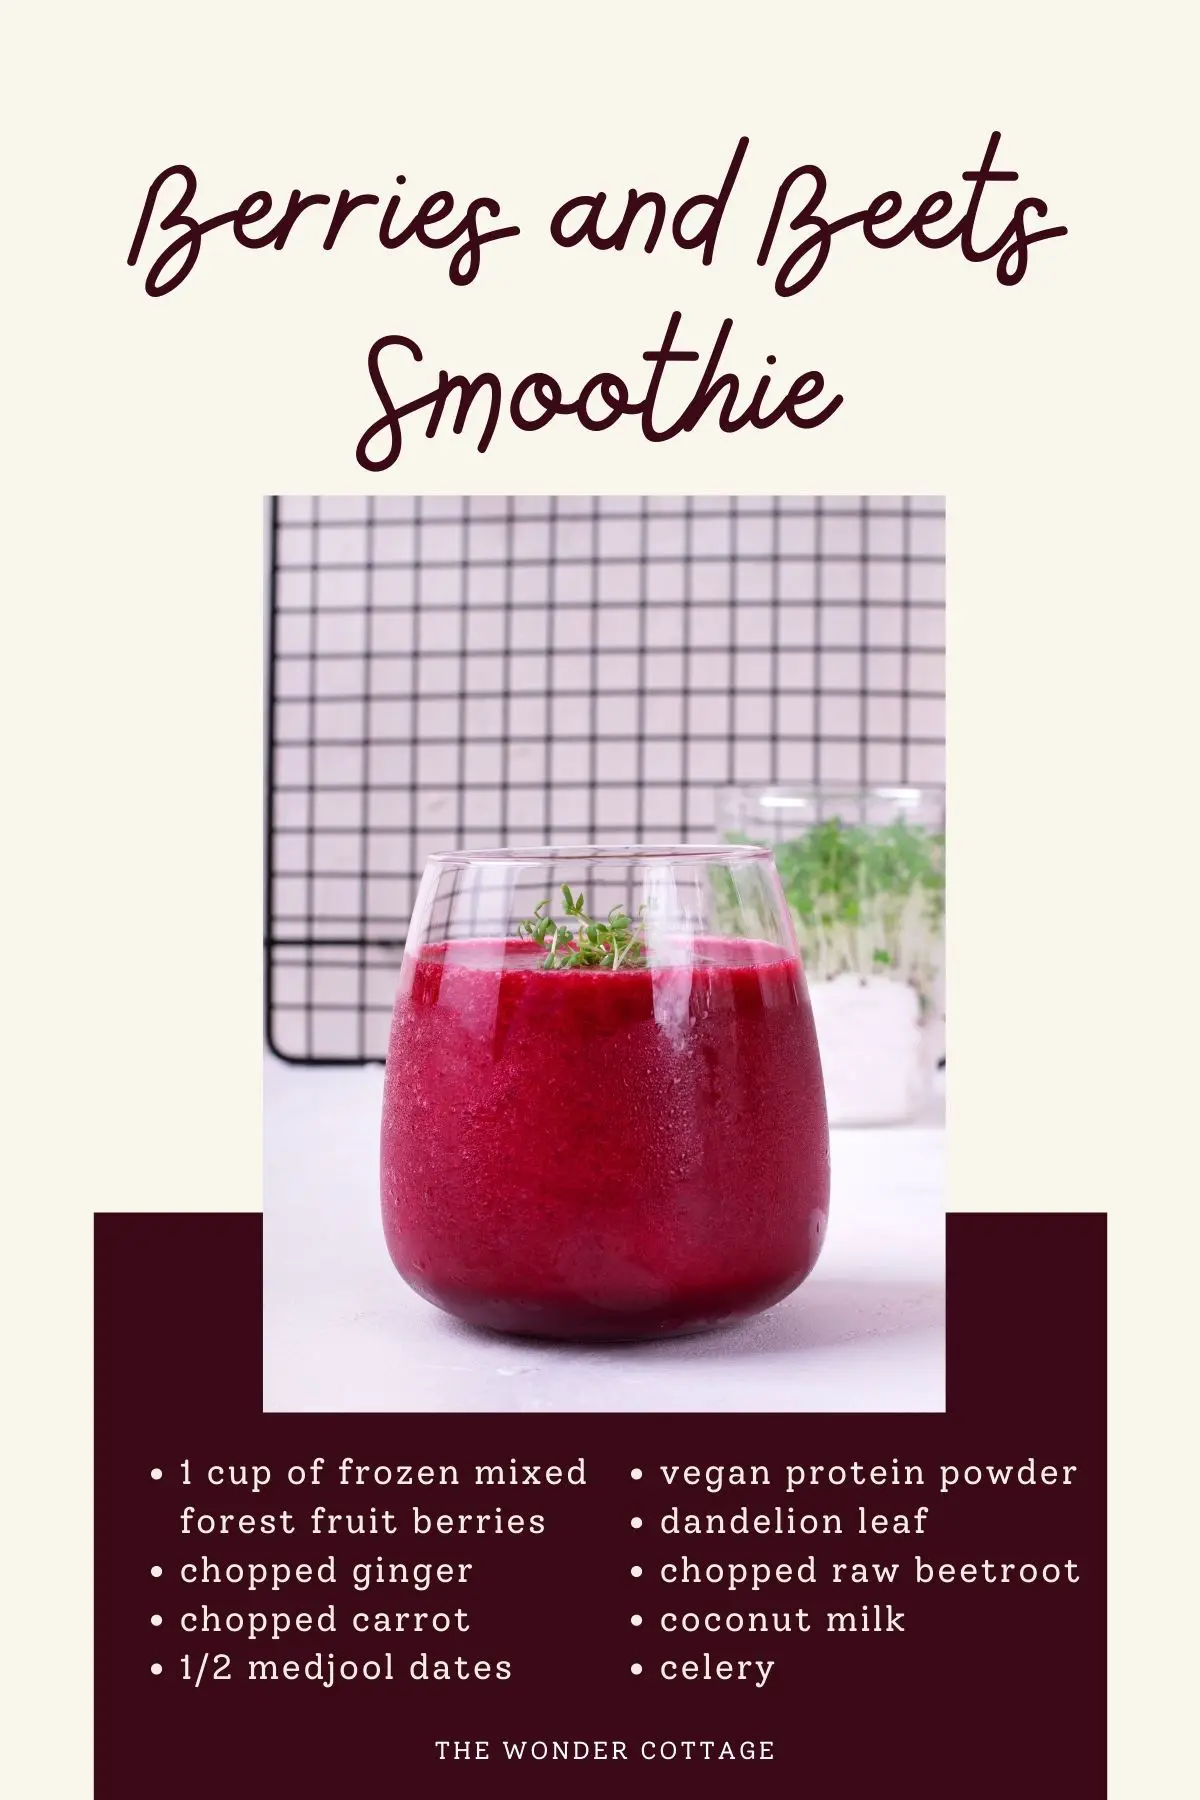 Berries and beets smoothie